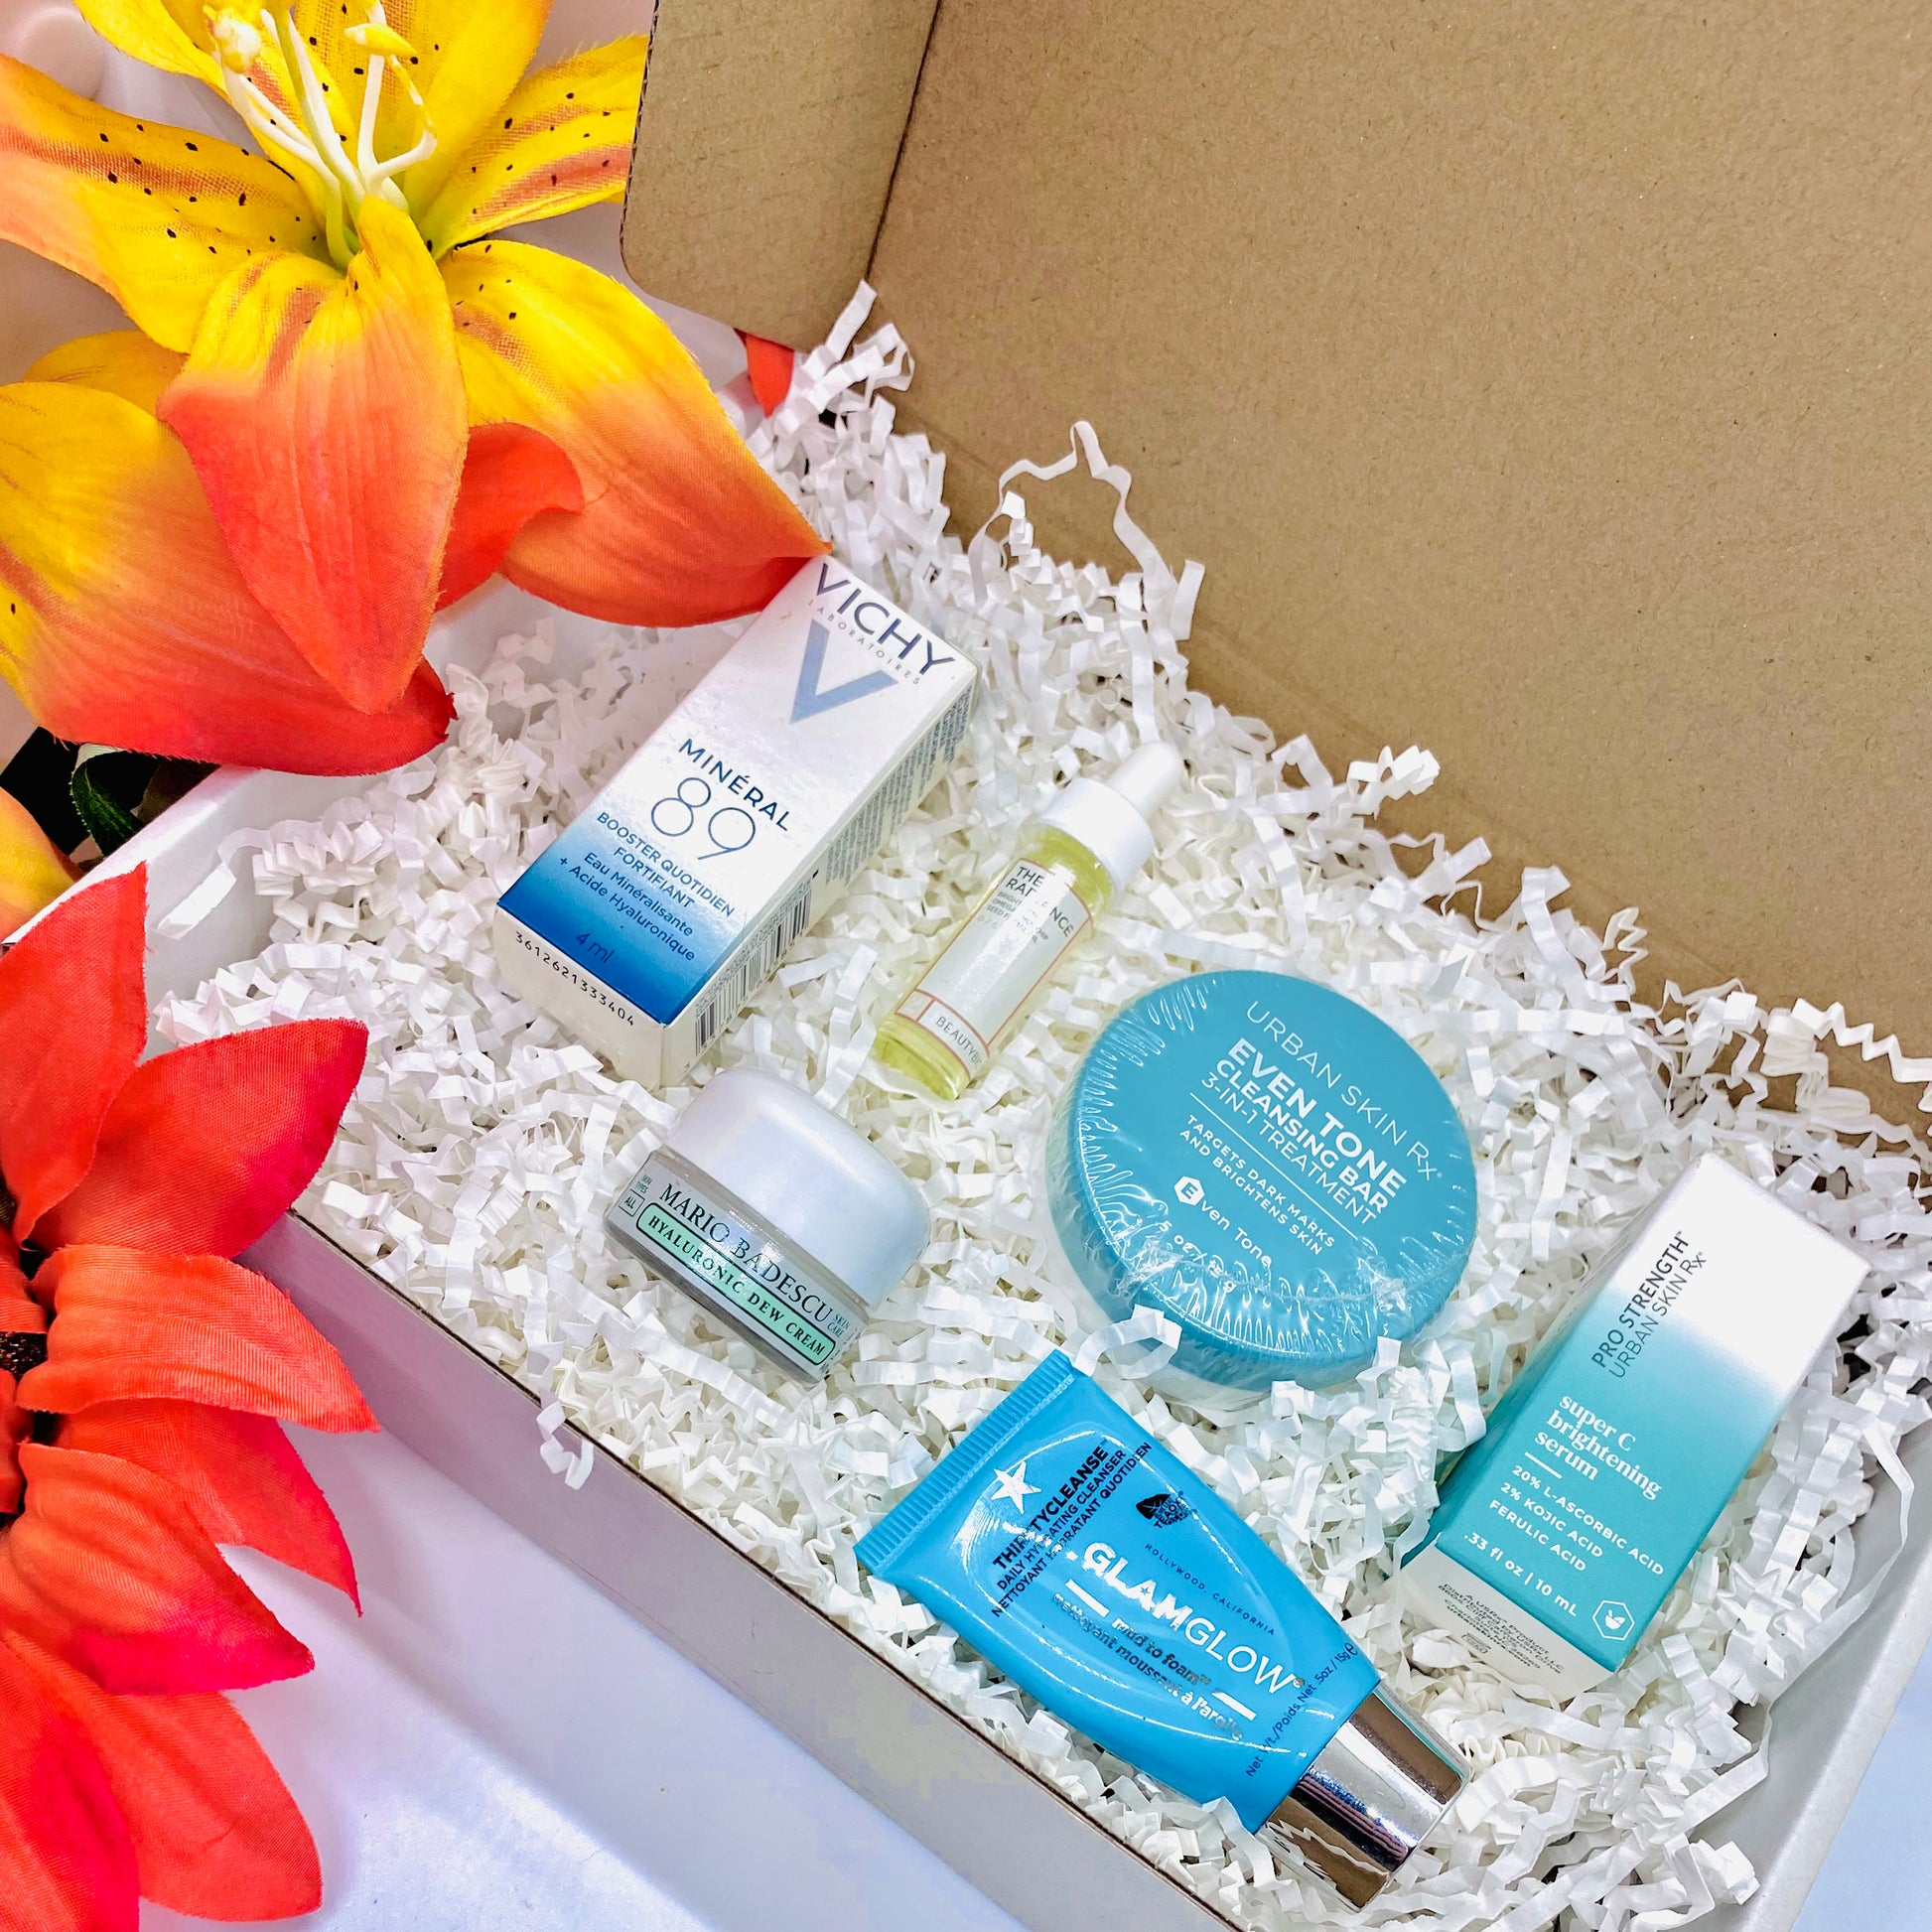 The ultimate skincare anti aging bundle with top premium brands for all skin type. Excellent gift and very limit, only available at Fa etreasures.com